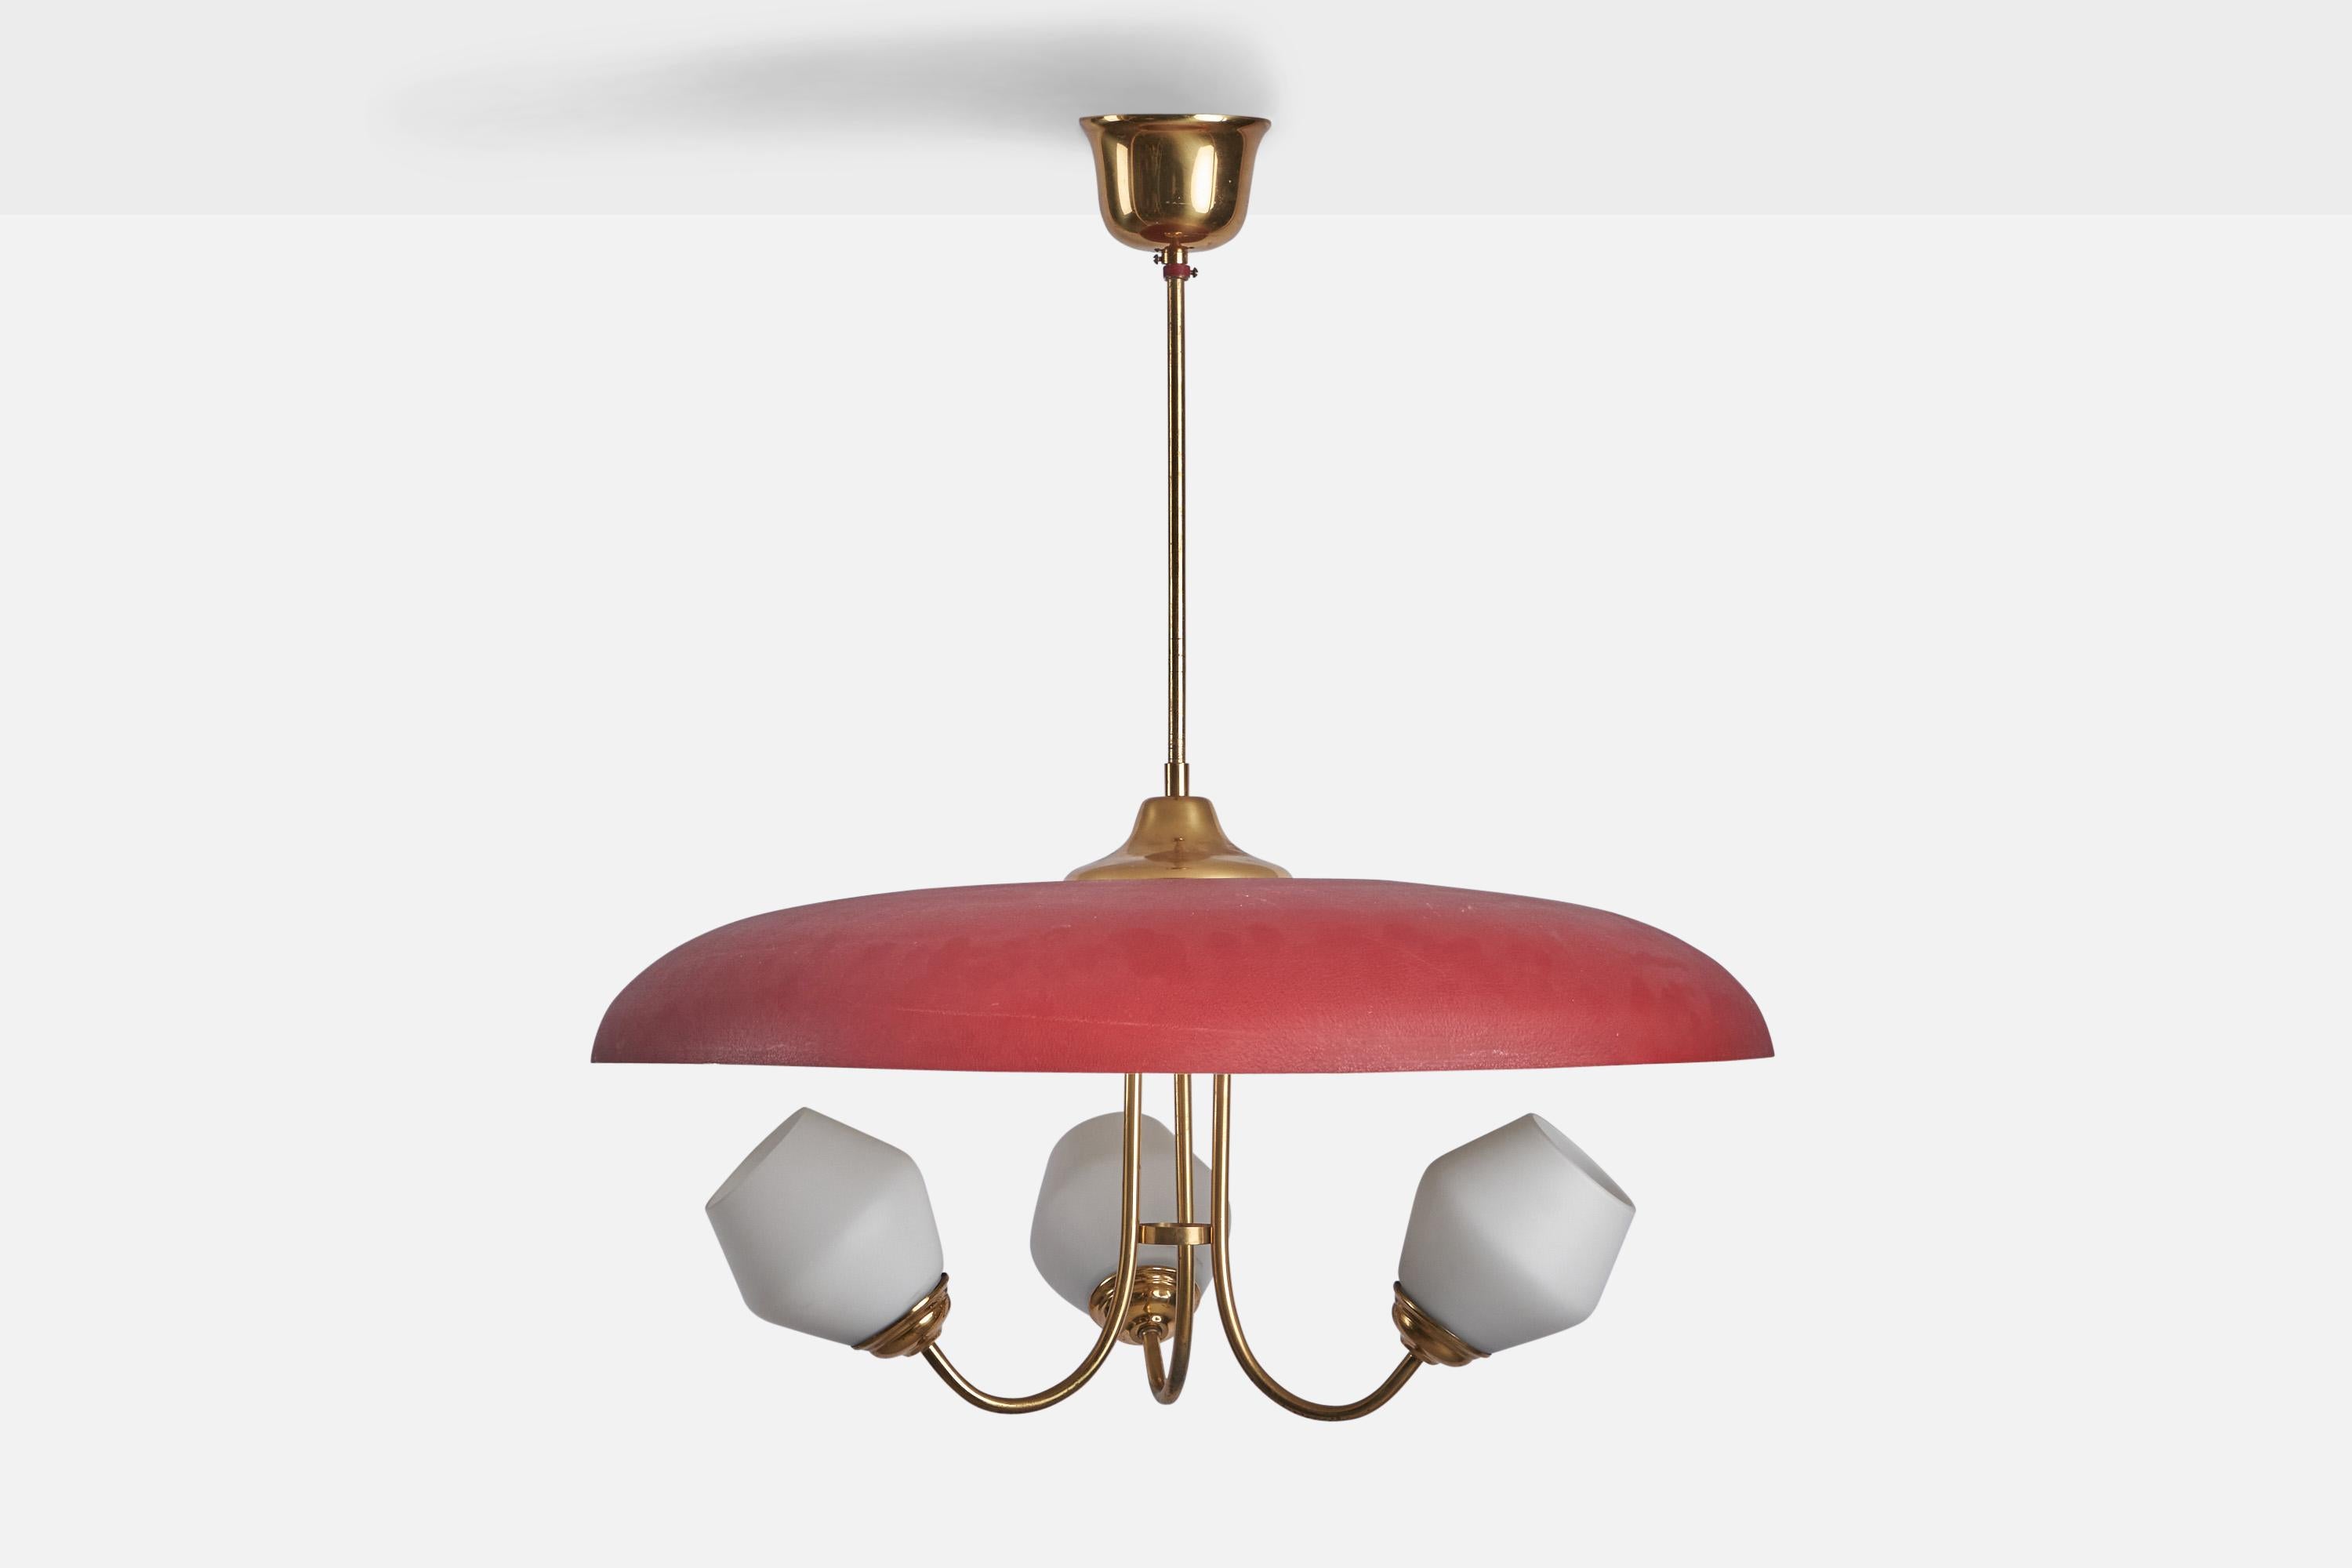 A brass, red-lacquered and opaline glass chandelier designed by Bent Karlby and produced by Lyfa, Denmark, 1950s.

Overall Dimensions (inches): 27” H x 24” Diameter

Bulb Specifications: E-26 Bulb

Number of Sockets: 3